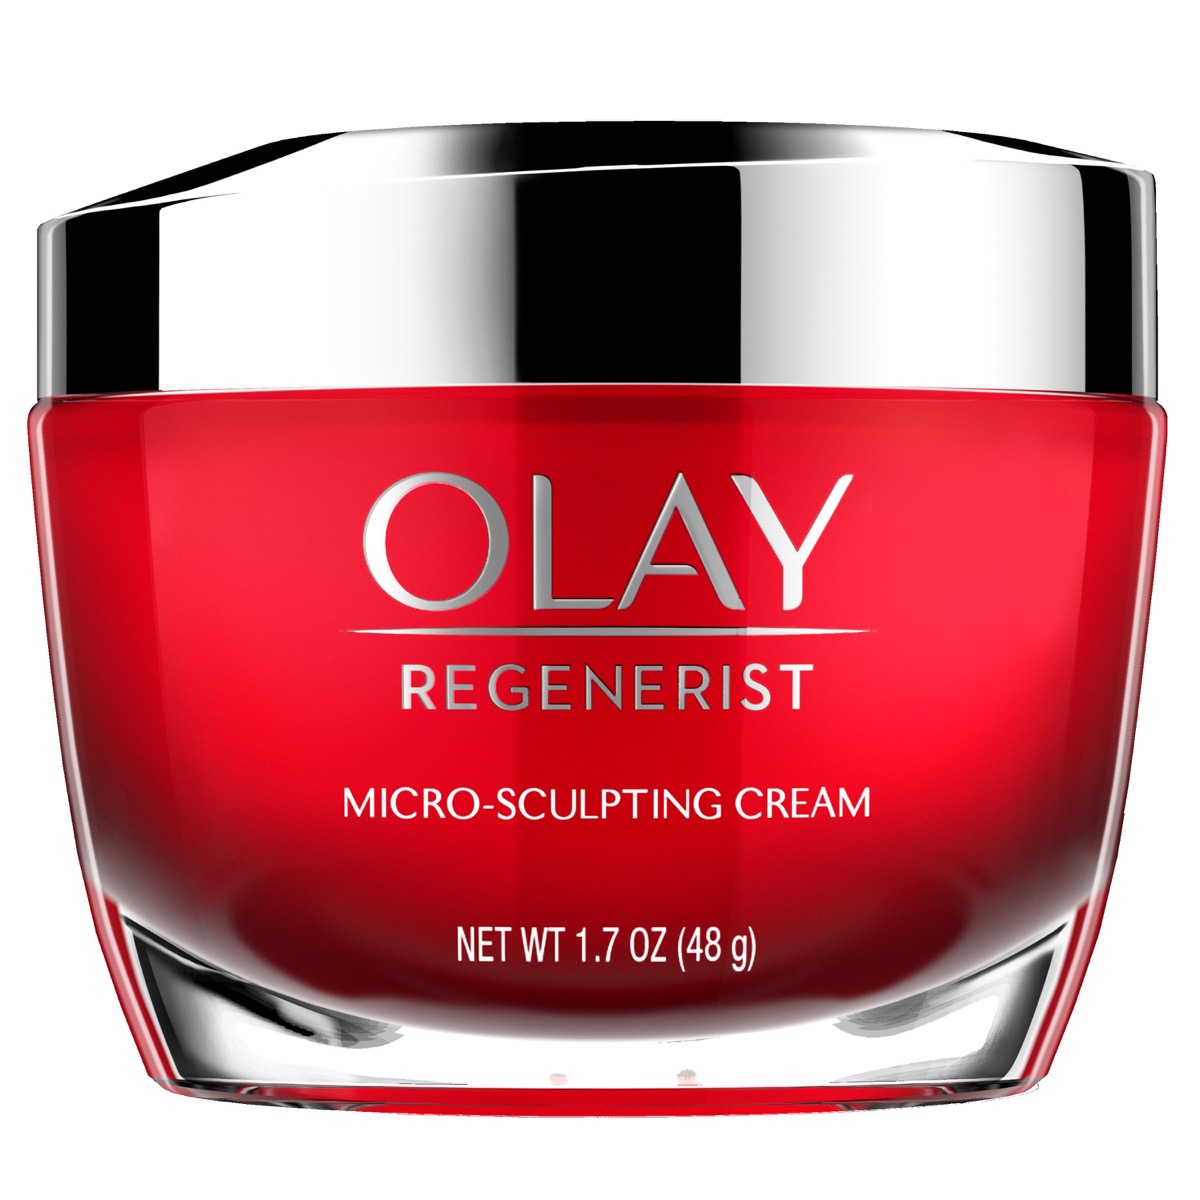 Olay face cream in red container